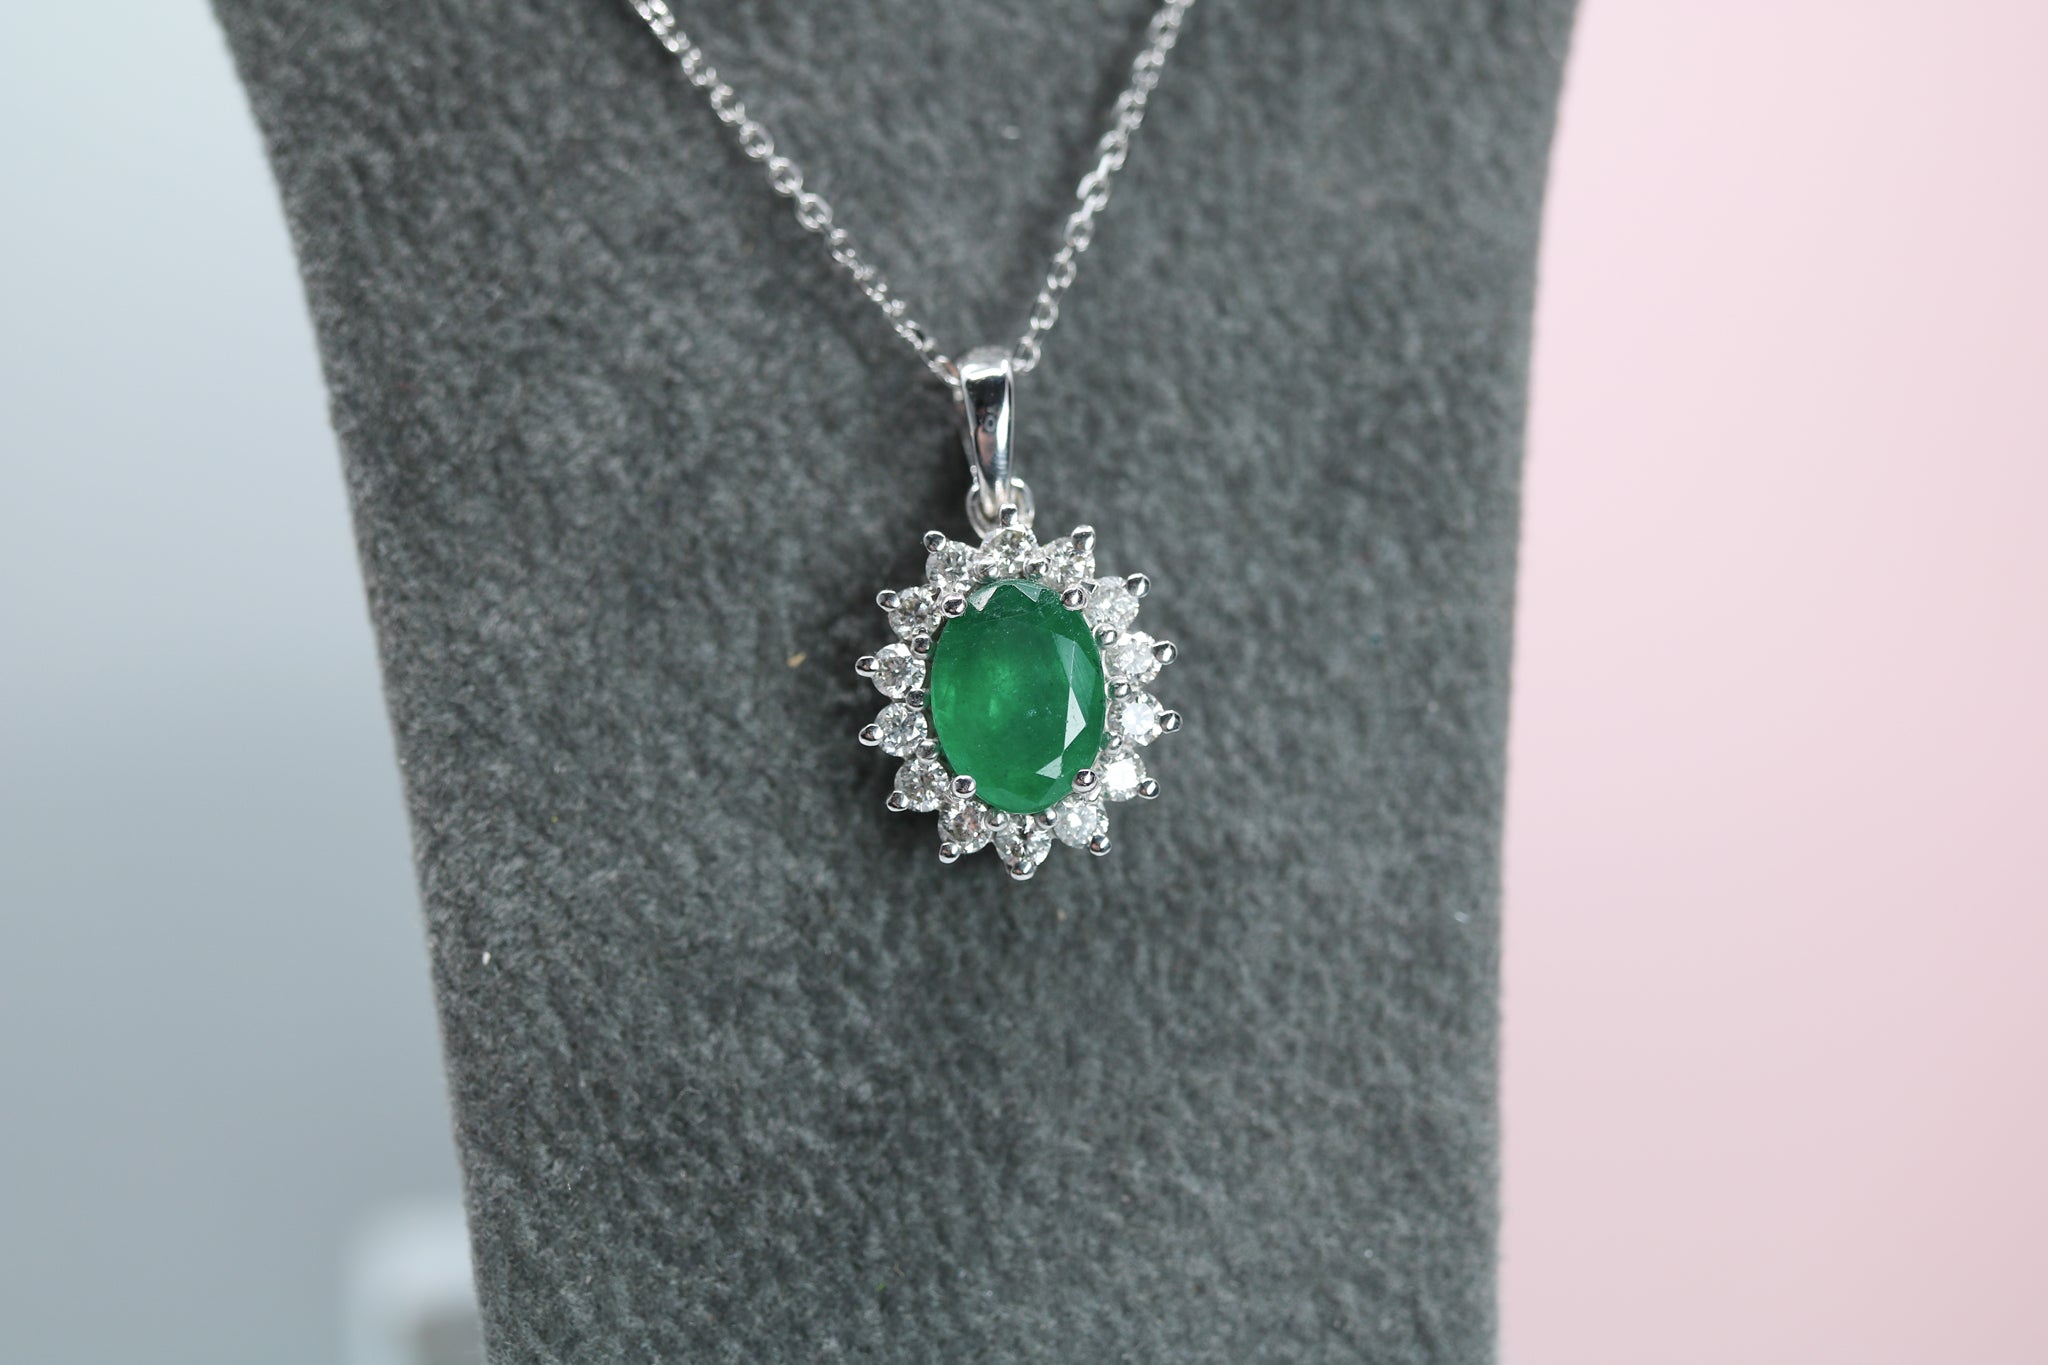 18ct White Gold Emerald & Diamond Necklace- HJ2059 - Hallmark Jewellers Formby & The Jewellers Bench Widnes